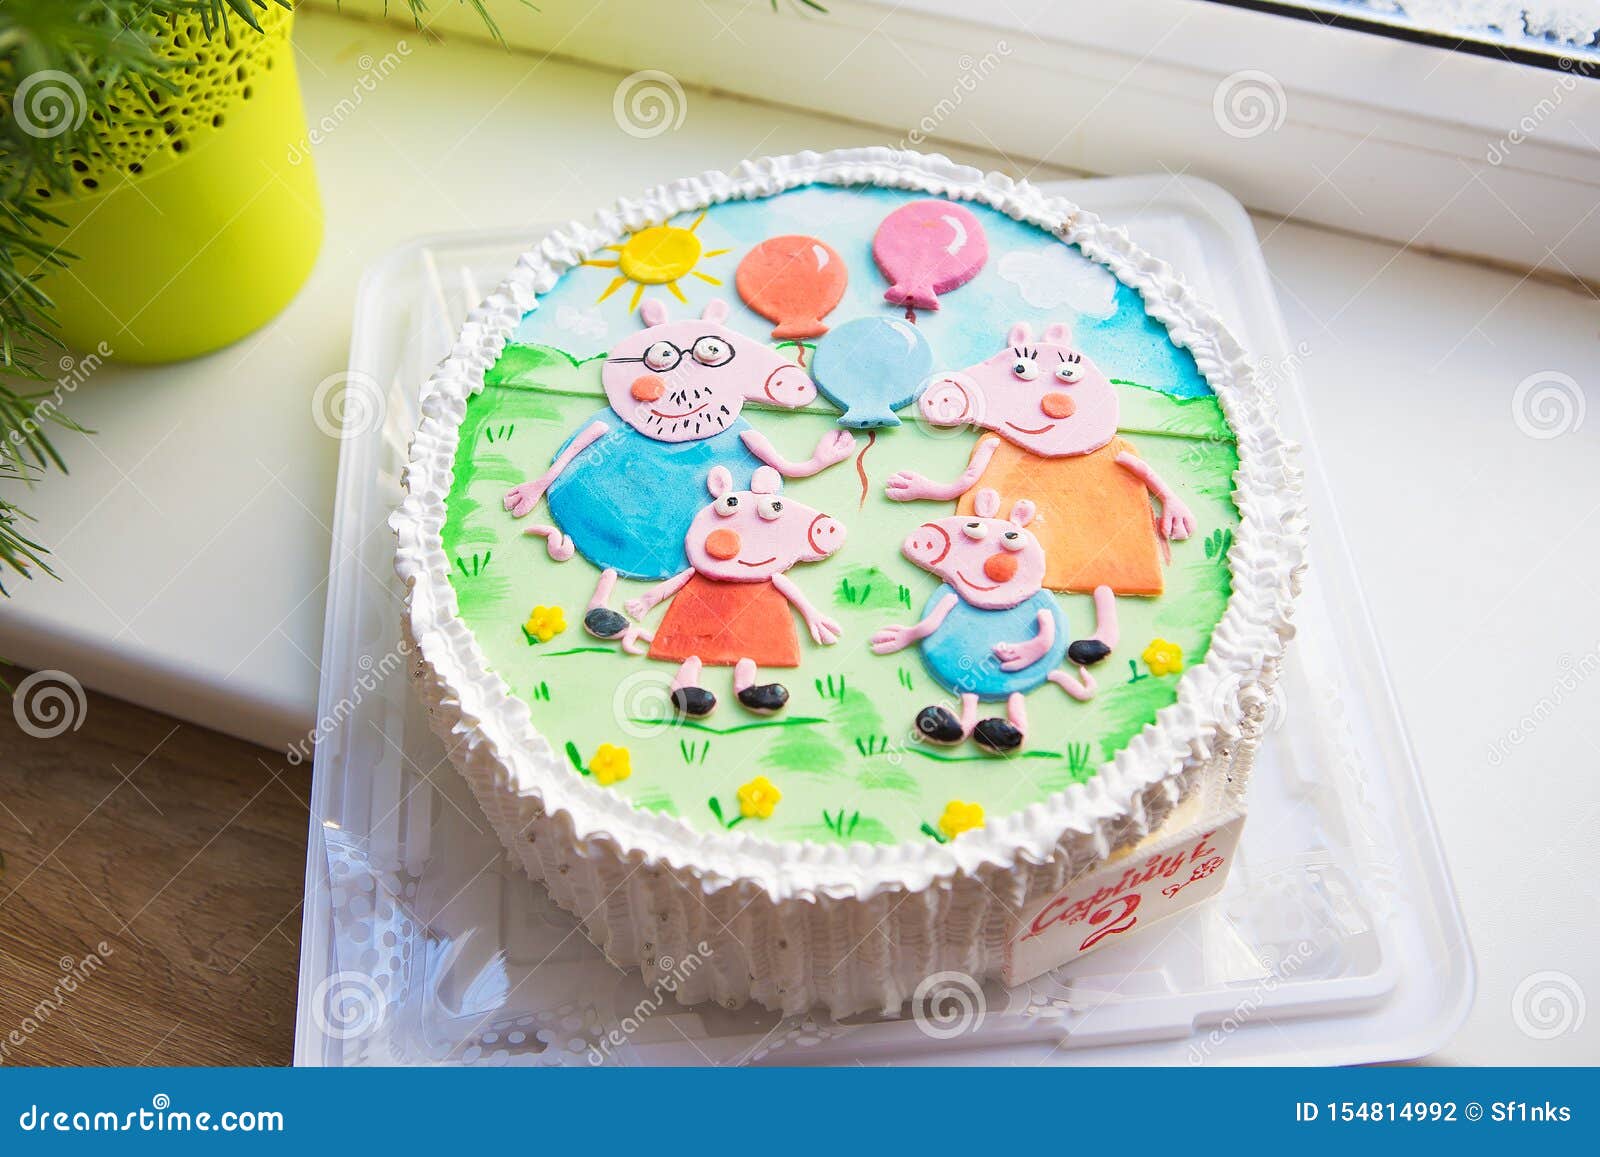 Beautiful and Bright Children`s Cake with a Cartoon Hero - Pigpa Peppa  Stock Illustration - Illustration of holiday, gourmet: 154814992